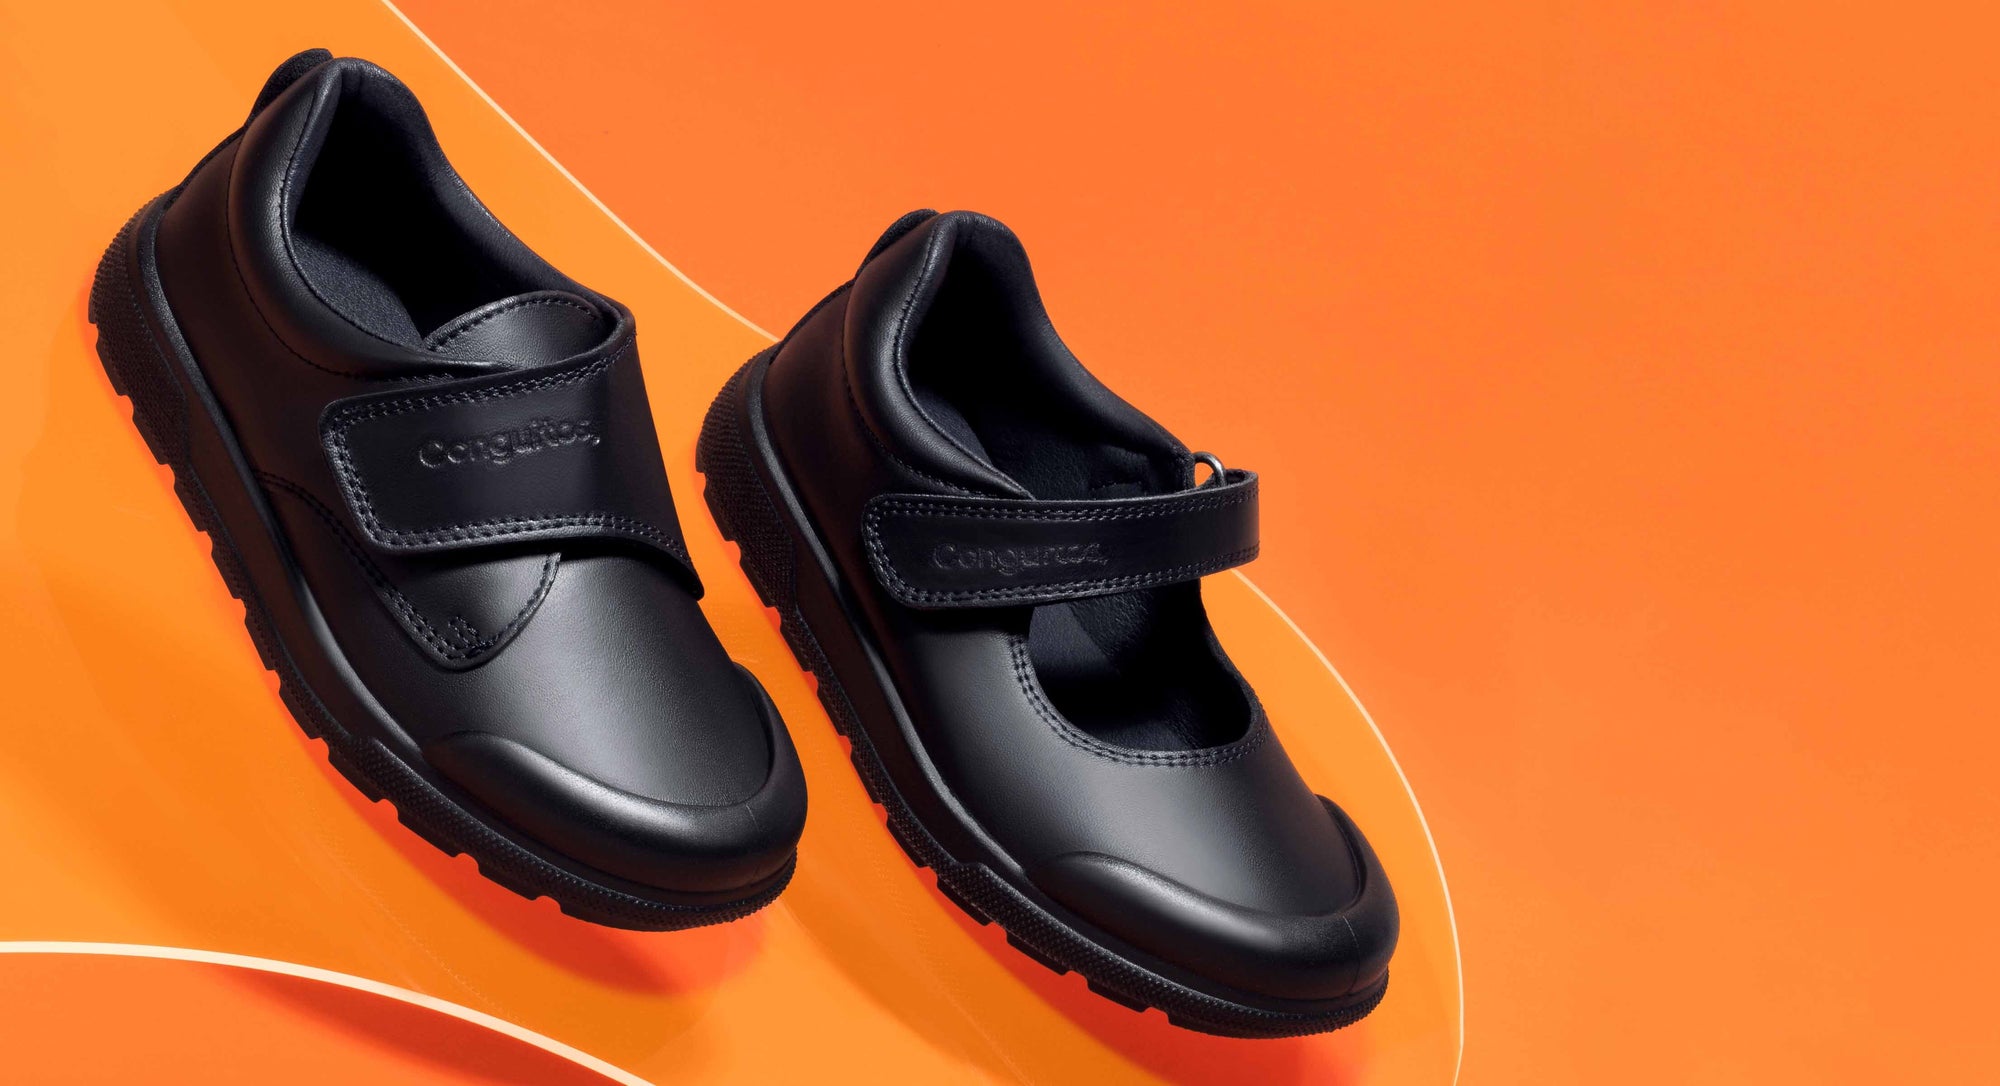 Indestructible school shoes by Conguitos: 2023 trend in classrooms